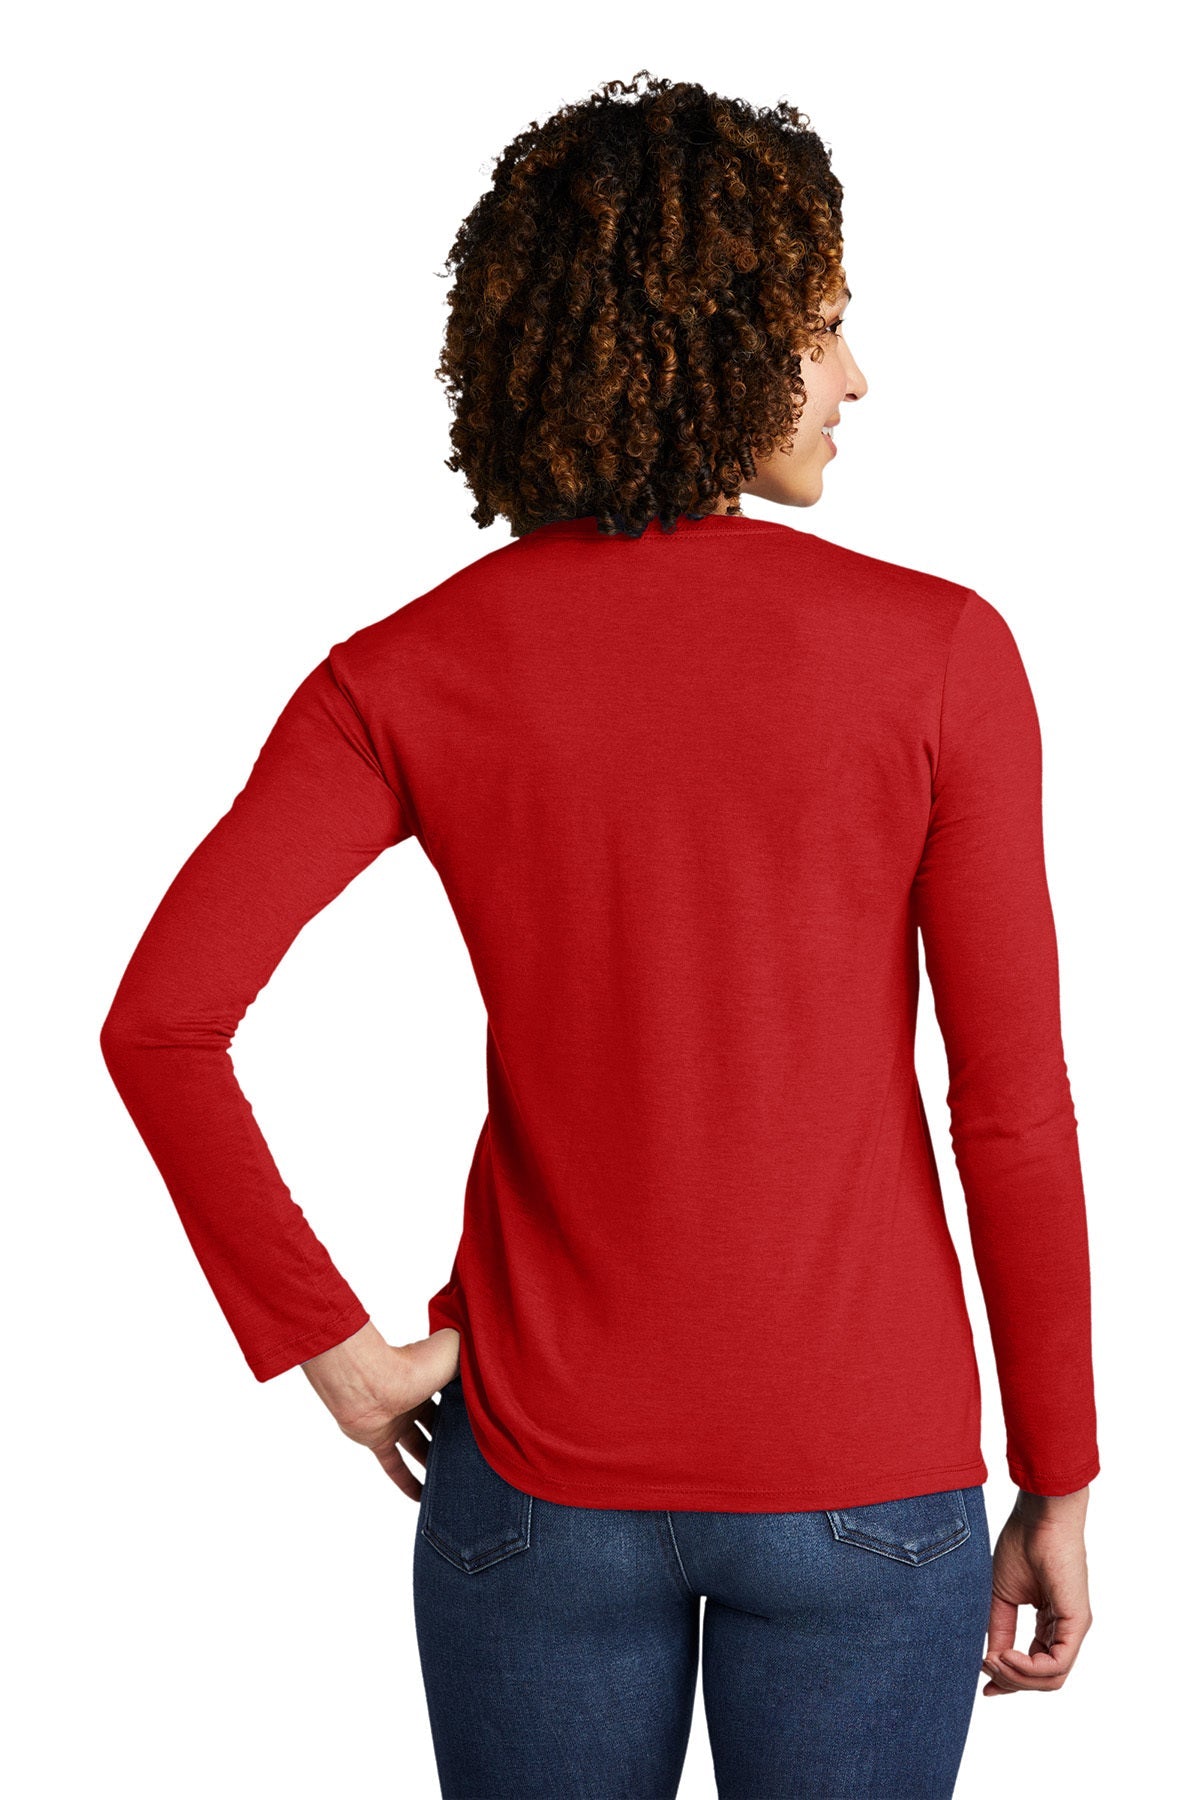 Allmade Women's Tri-Blend Customized Long Sleeve Tee, Rise Up Red